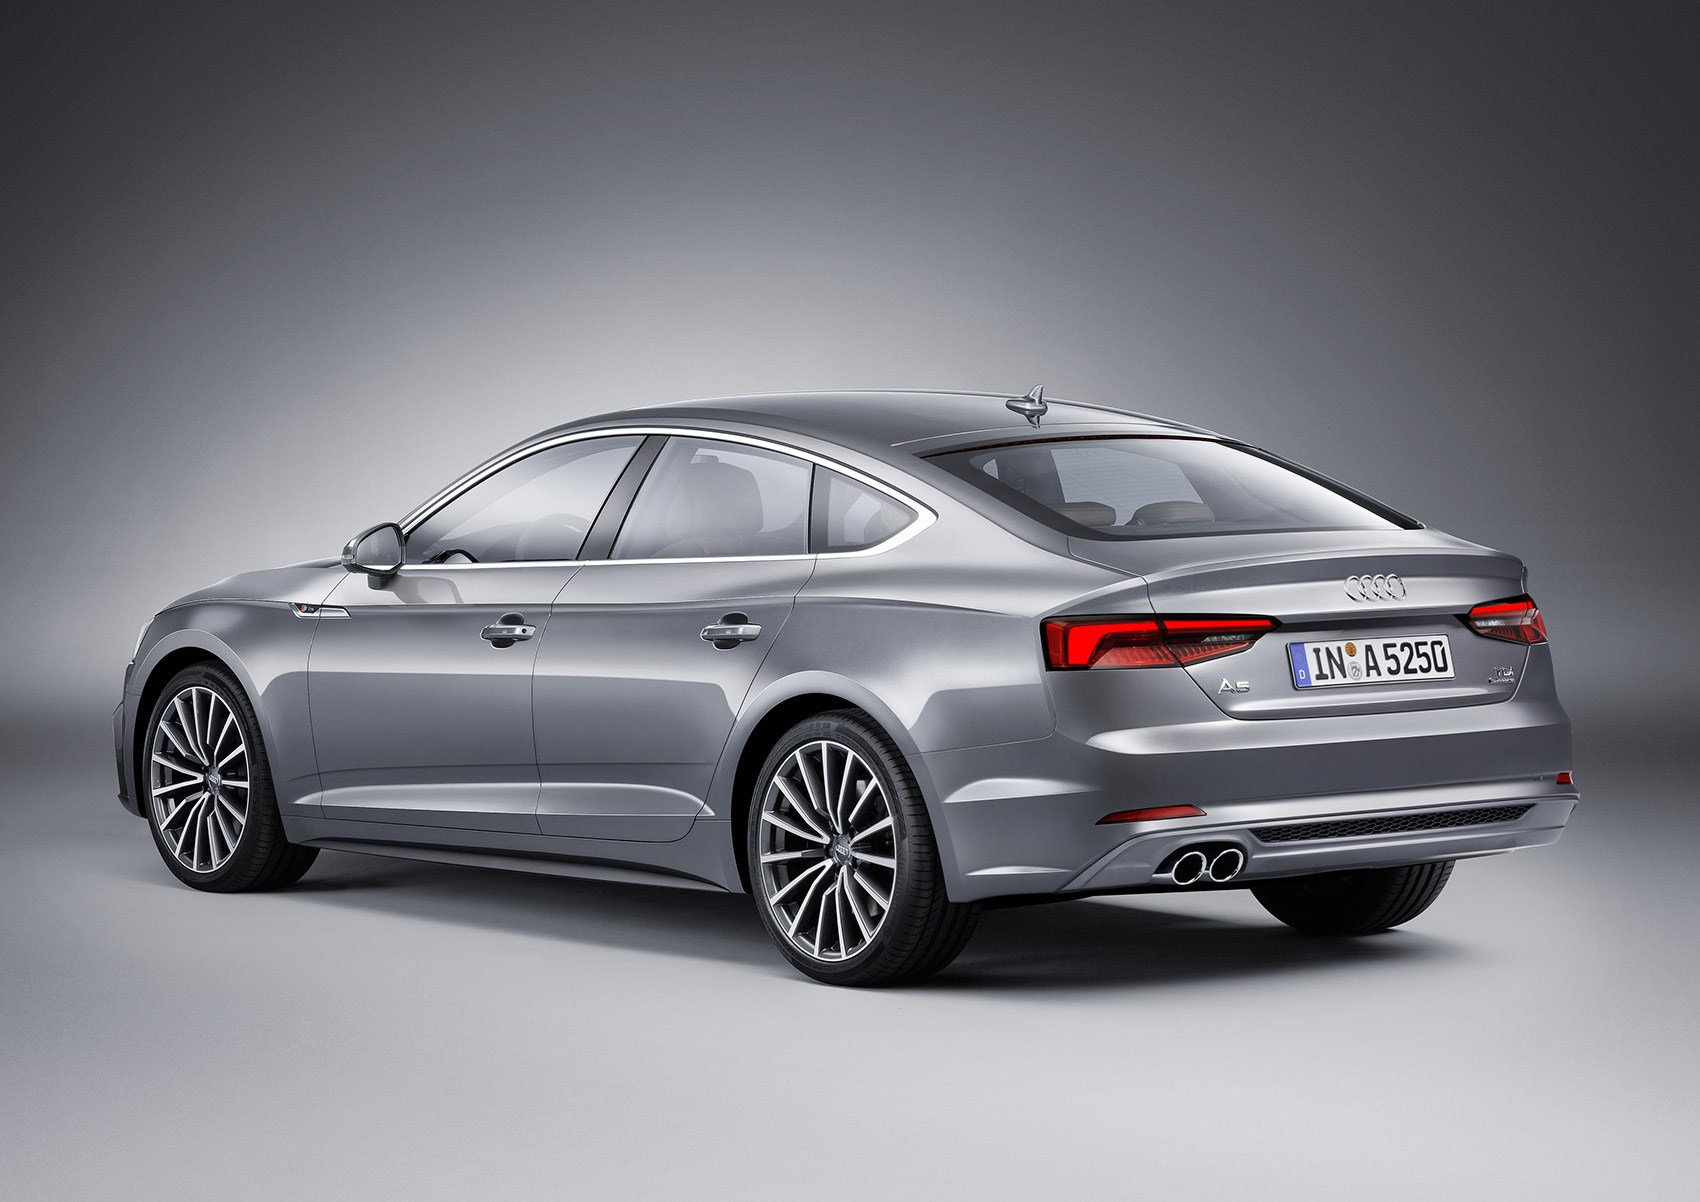 New Audi A5 Sportback: the 5dr of the 2dr of the 4dr schmoozes in